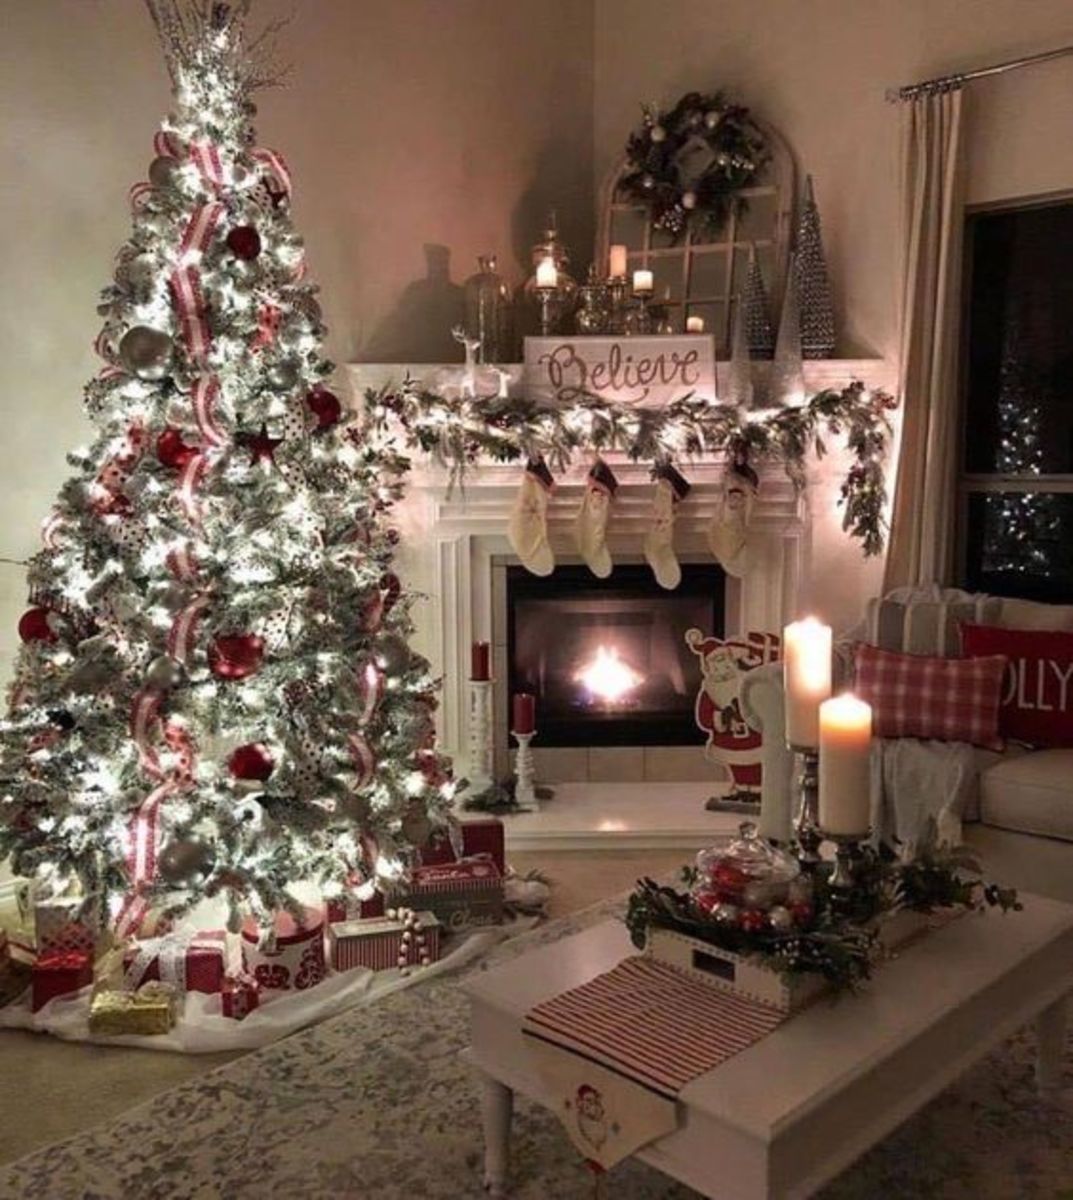 "Believe" Mantel With Garland and Stockings